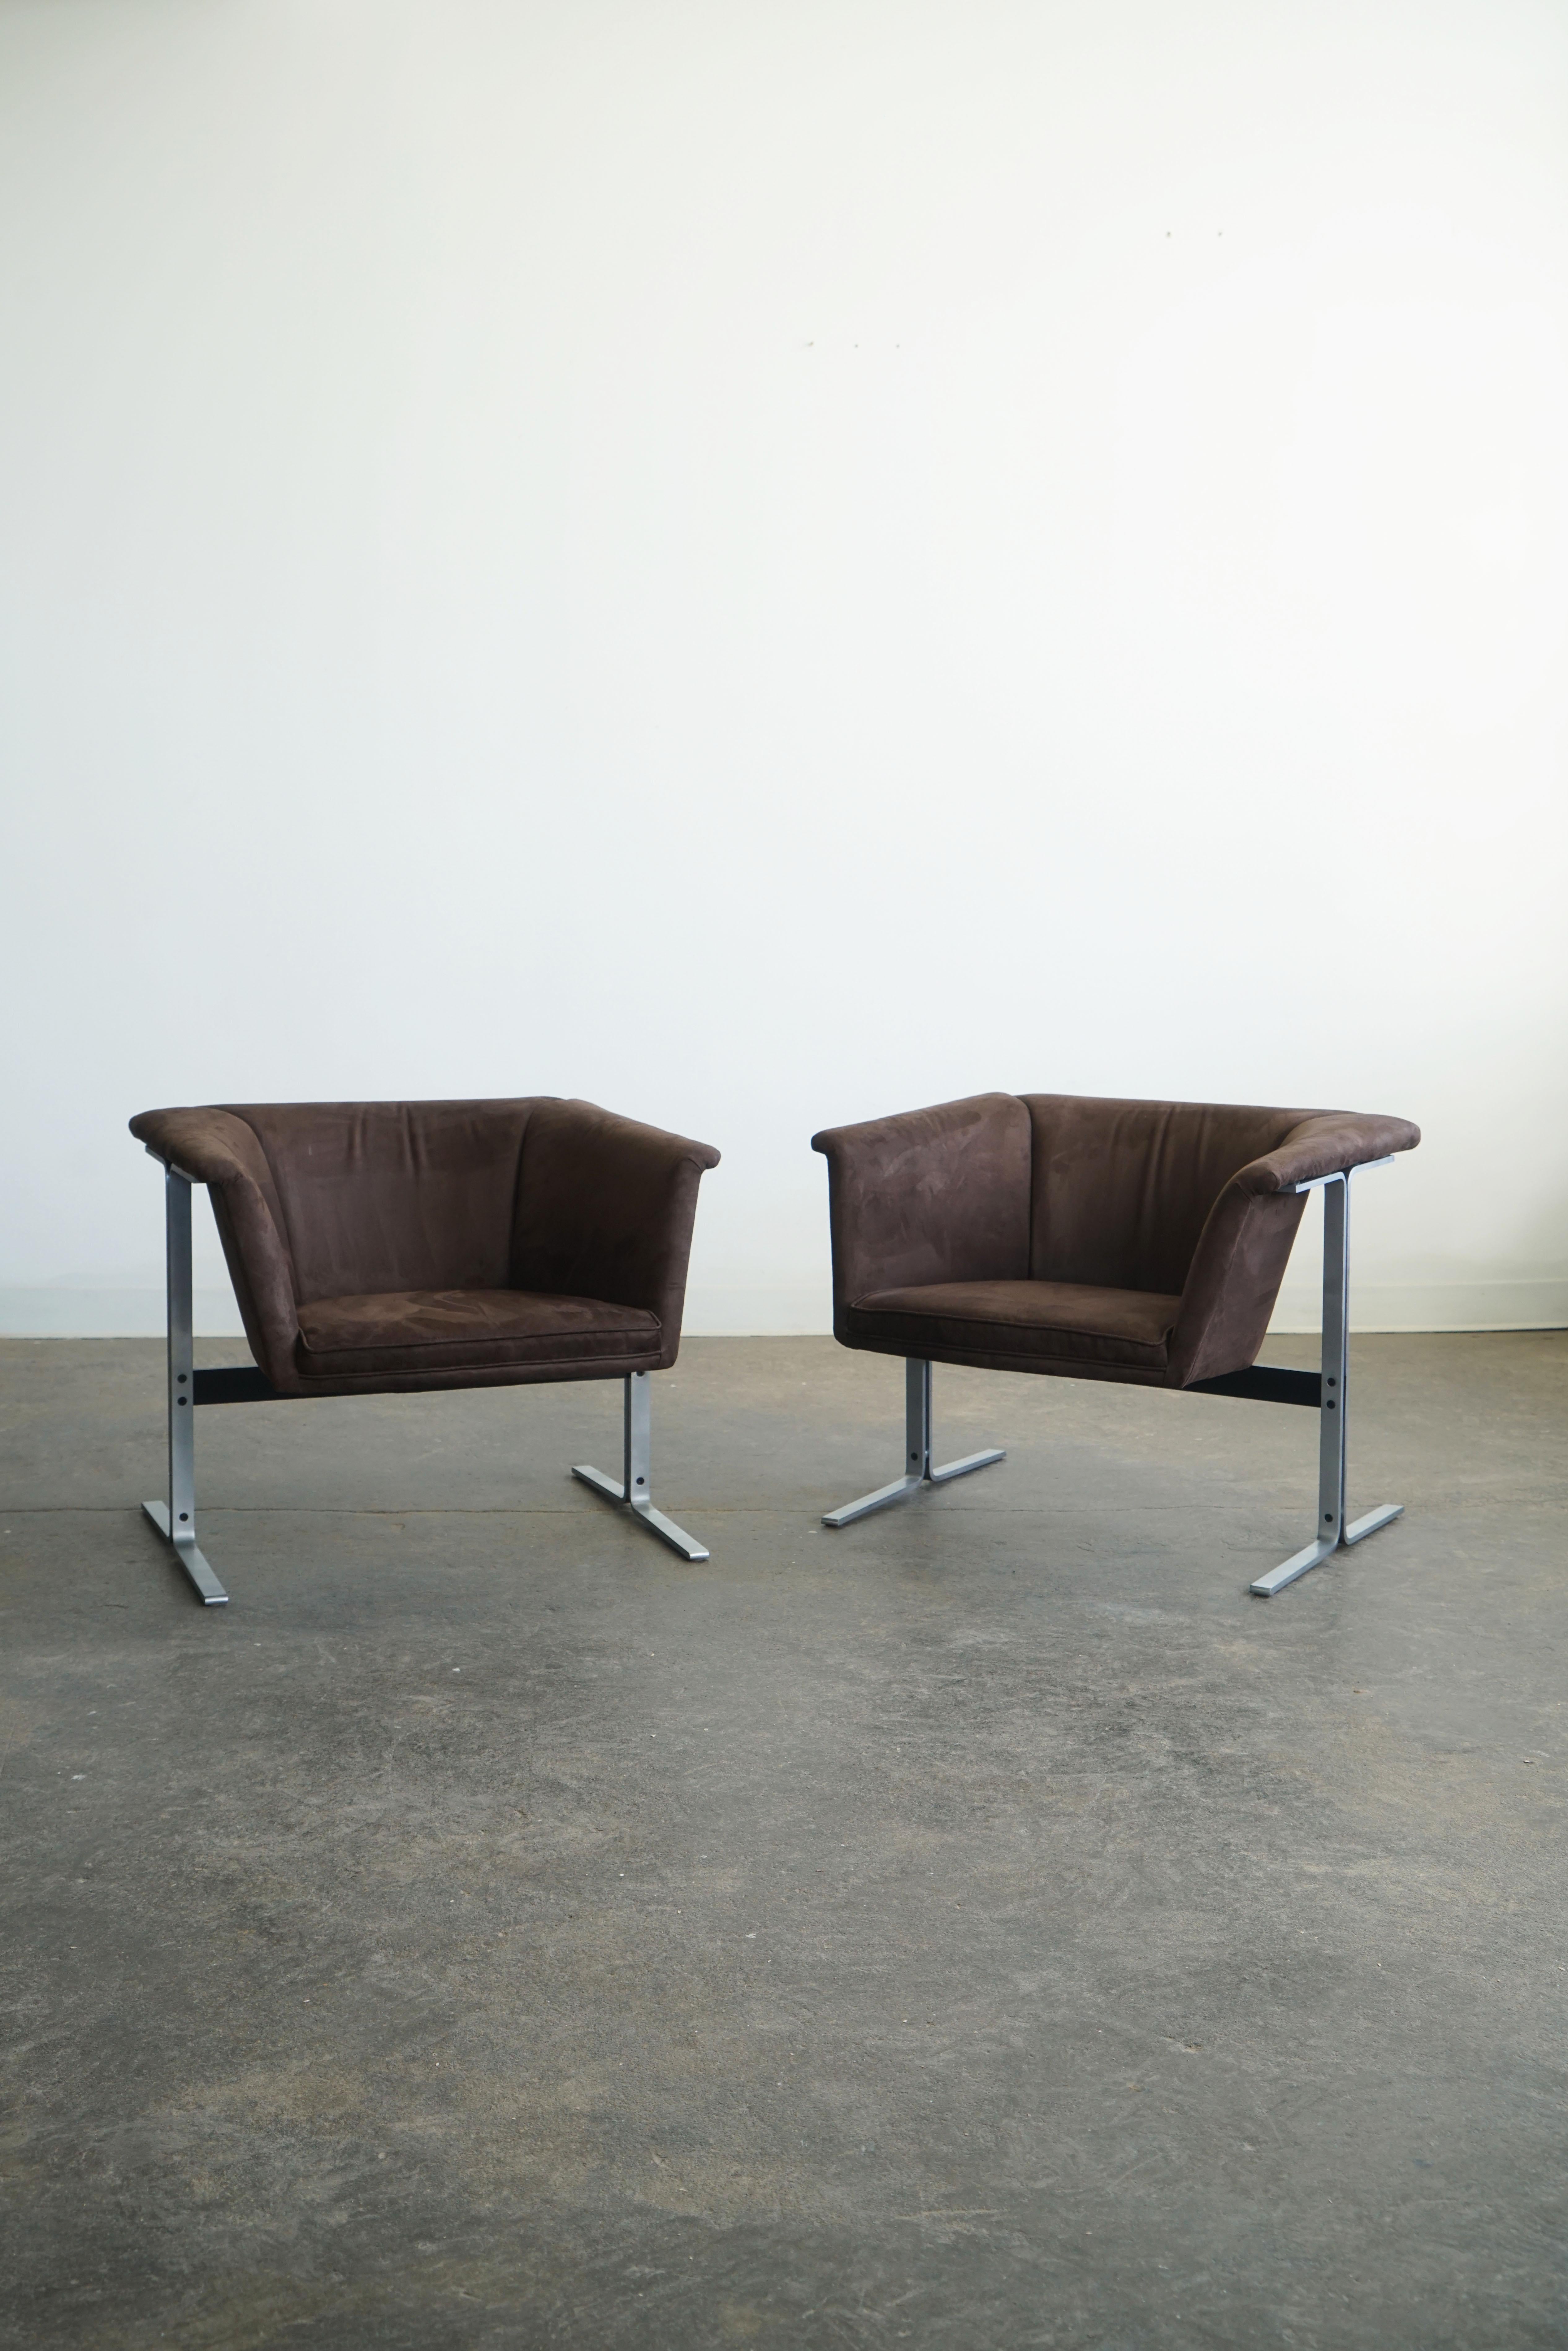 A pair of Geoffrey Harcourt lounges chairs model 042 for Artifort.
United Kingdom / The Netherlands, circa 1965
Chrome-plated steel, enameled steel, microfiber upholstery

These very cool space age style chairs were featured in Stanley Kubrik's film